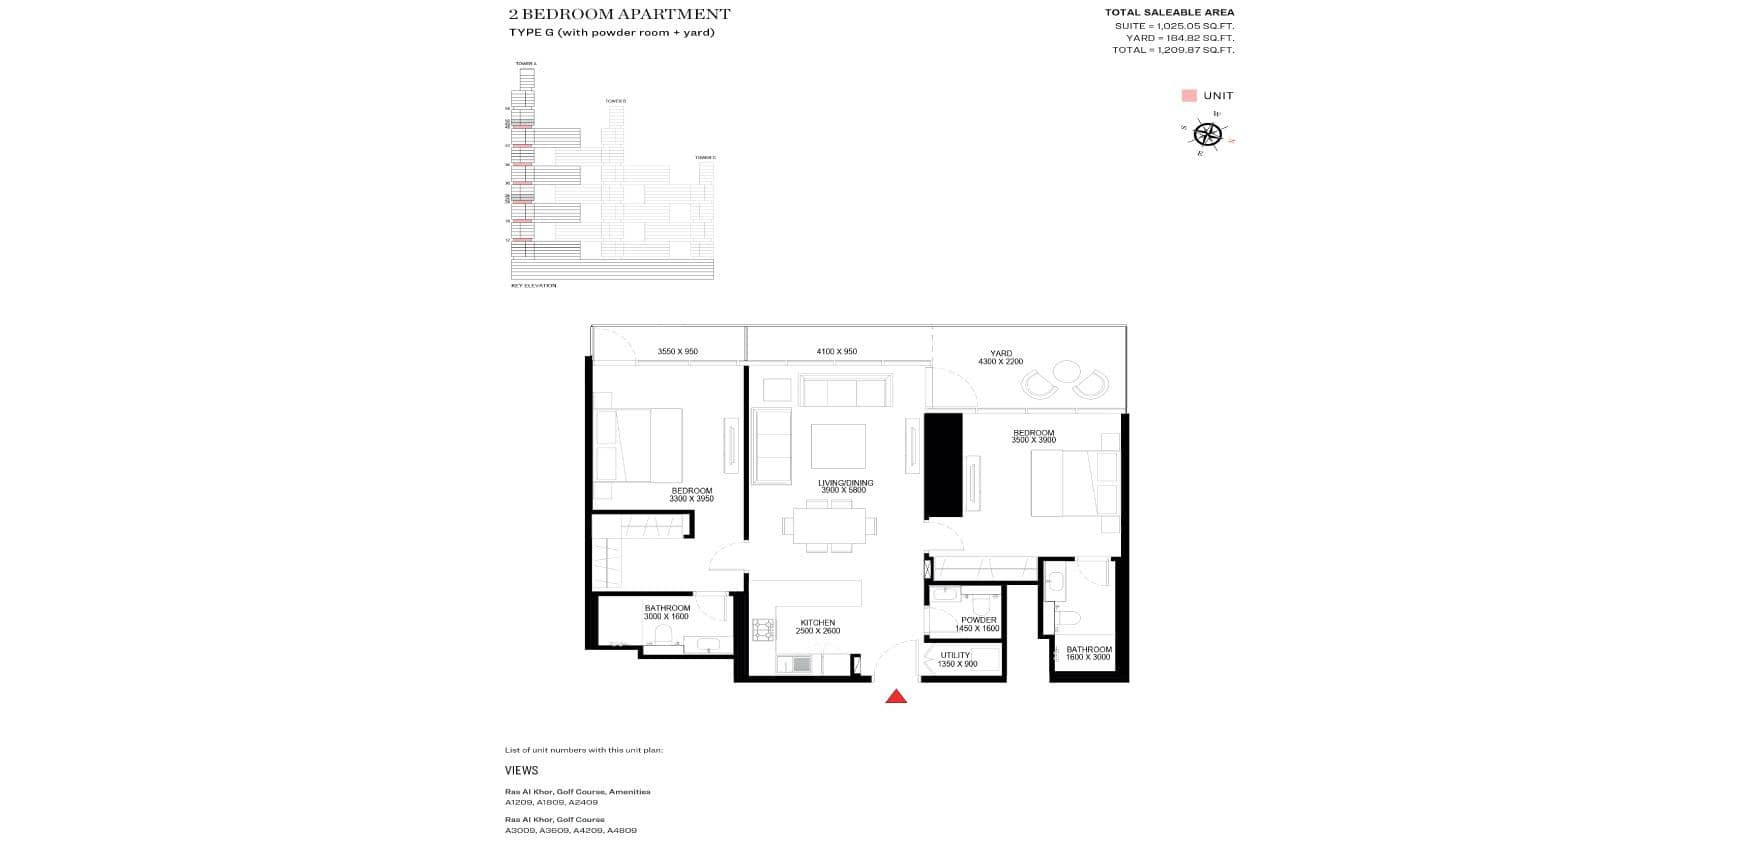 4_2BR-TYPE-G